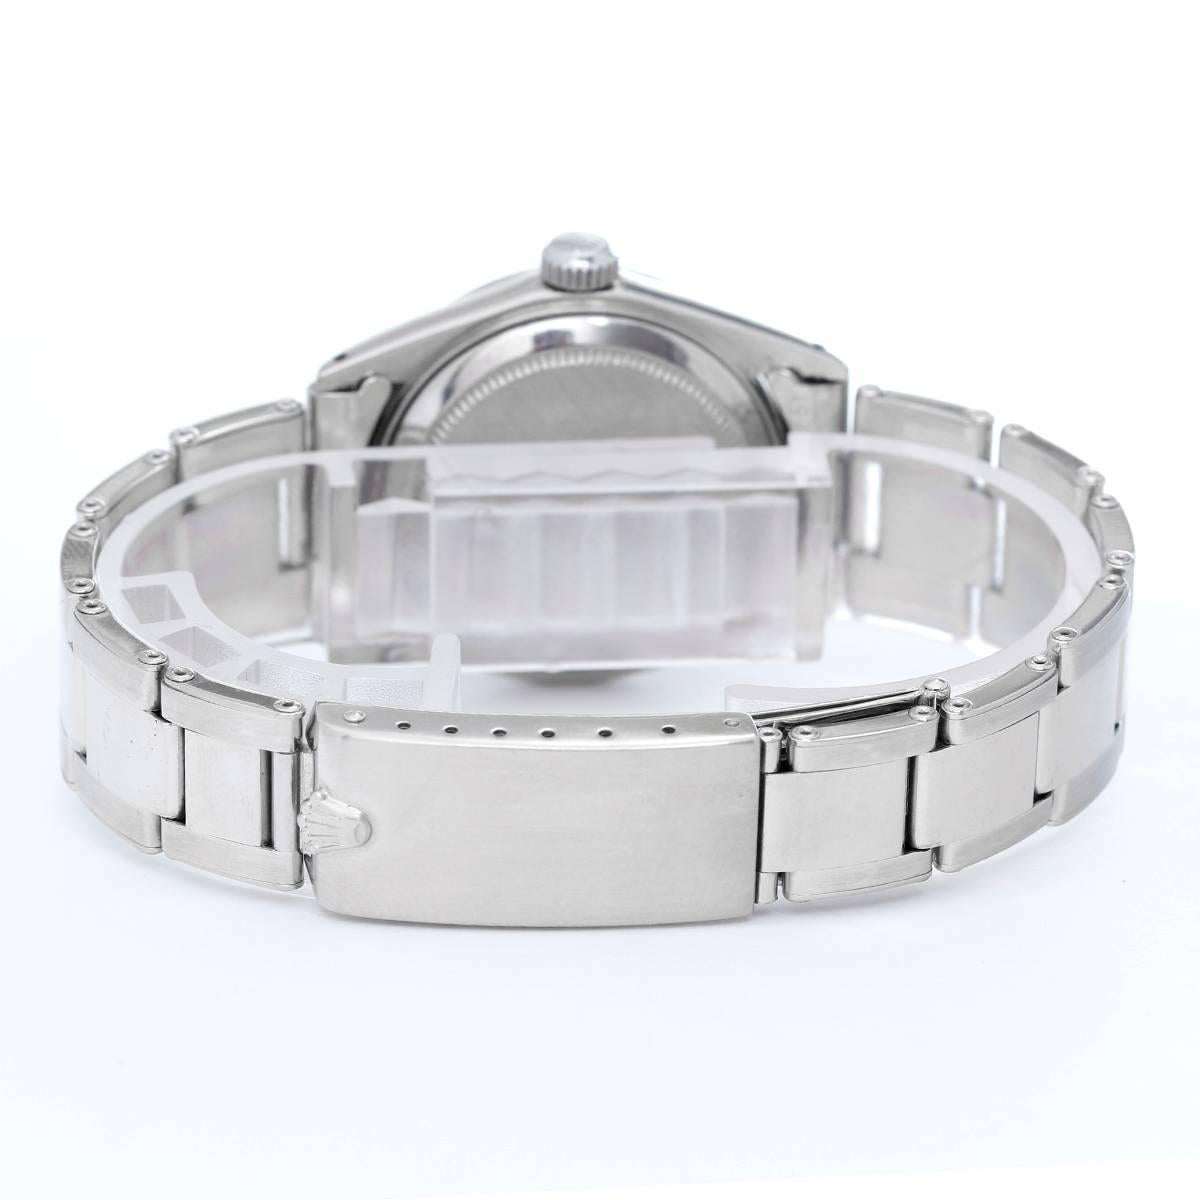 Rolex Datejust Midsize Men's or Ladies Steel Watch 6824 -  Automatic winding, acrylic crystal. 18k White gold case with fluted bezel (31mm diameter). Silvered dial with stick markers. 18k white gold riveted style Oyster bracelet. Pre-owned with